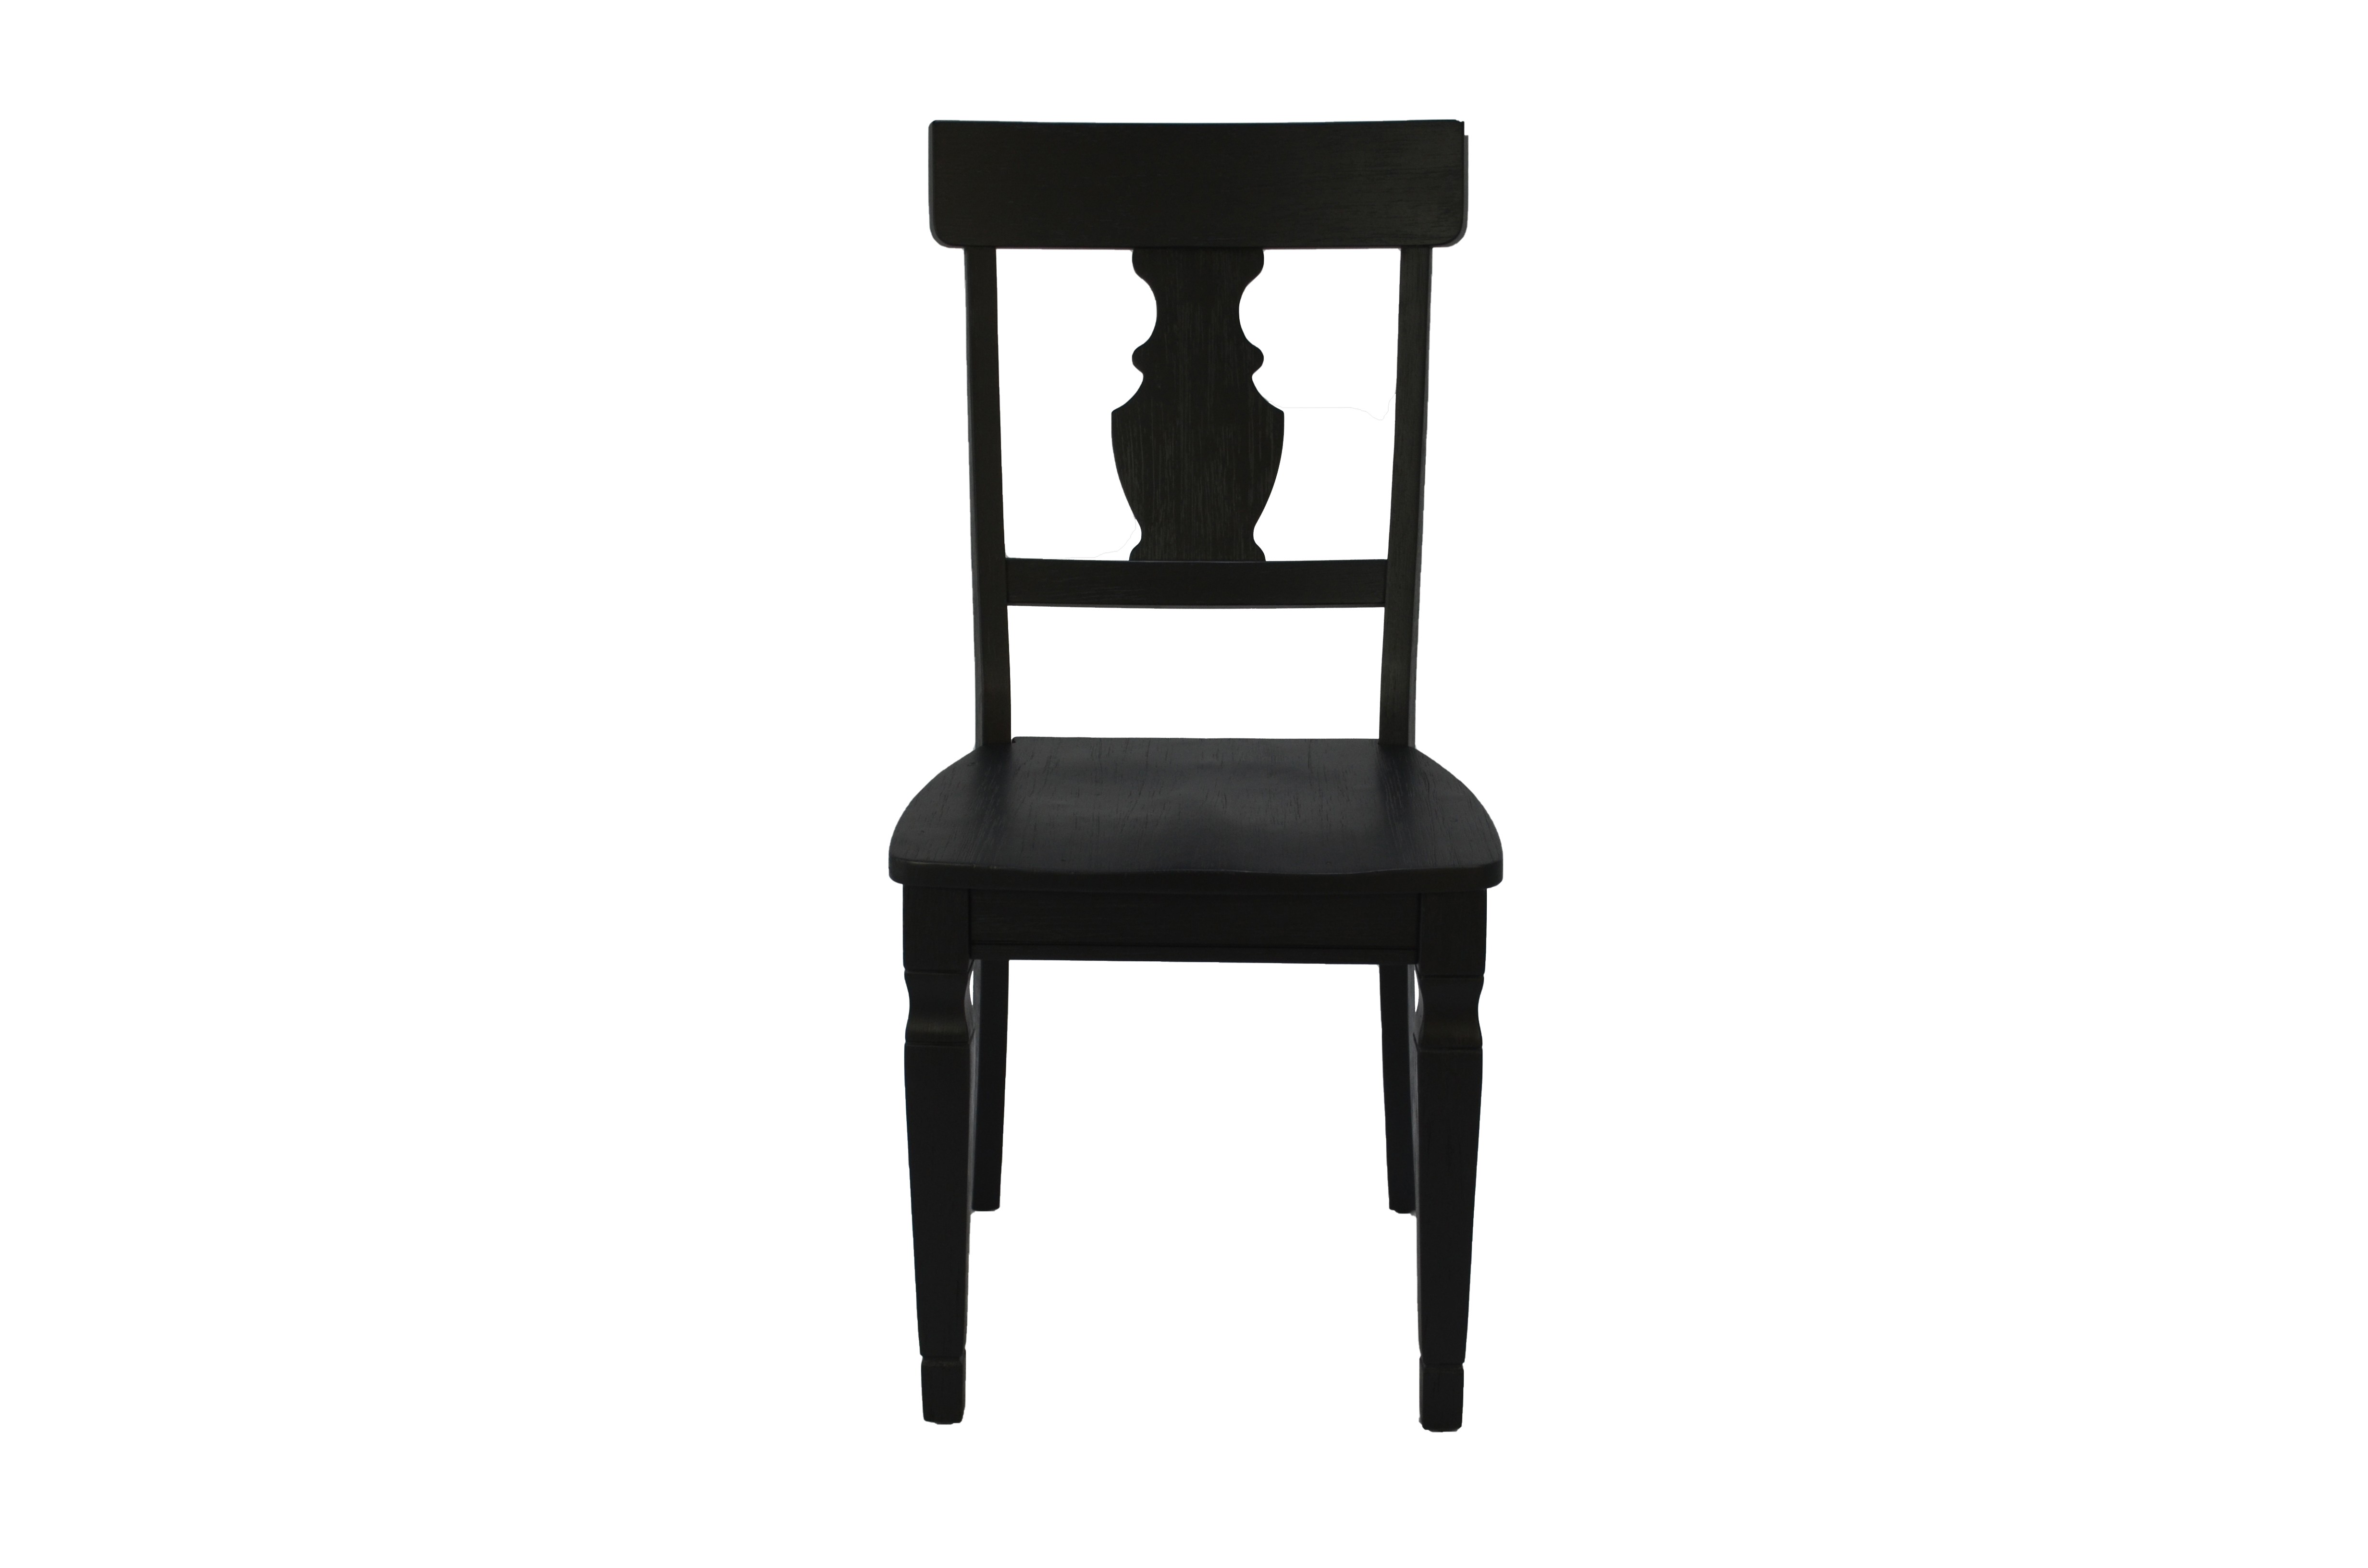 Bradding Dining Chair with Wooden Seating distressing Furniture with Antique, Modern Style Caramel Black Color in Vietnam